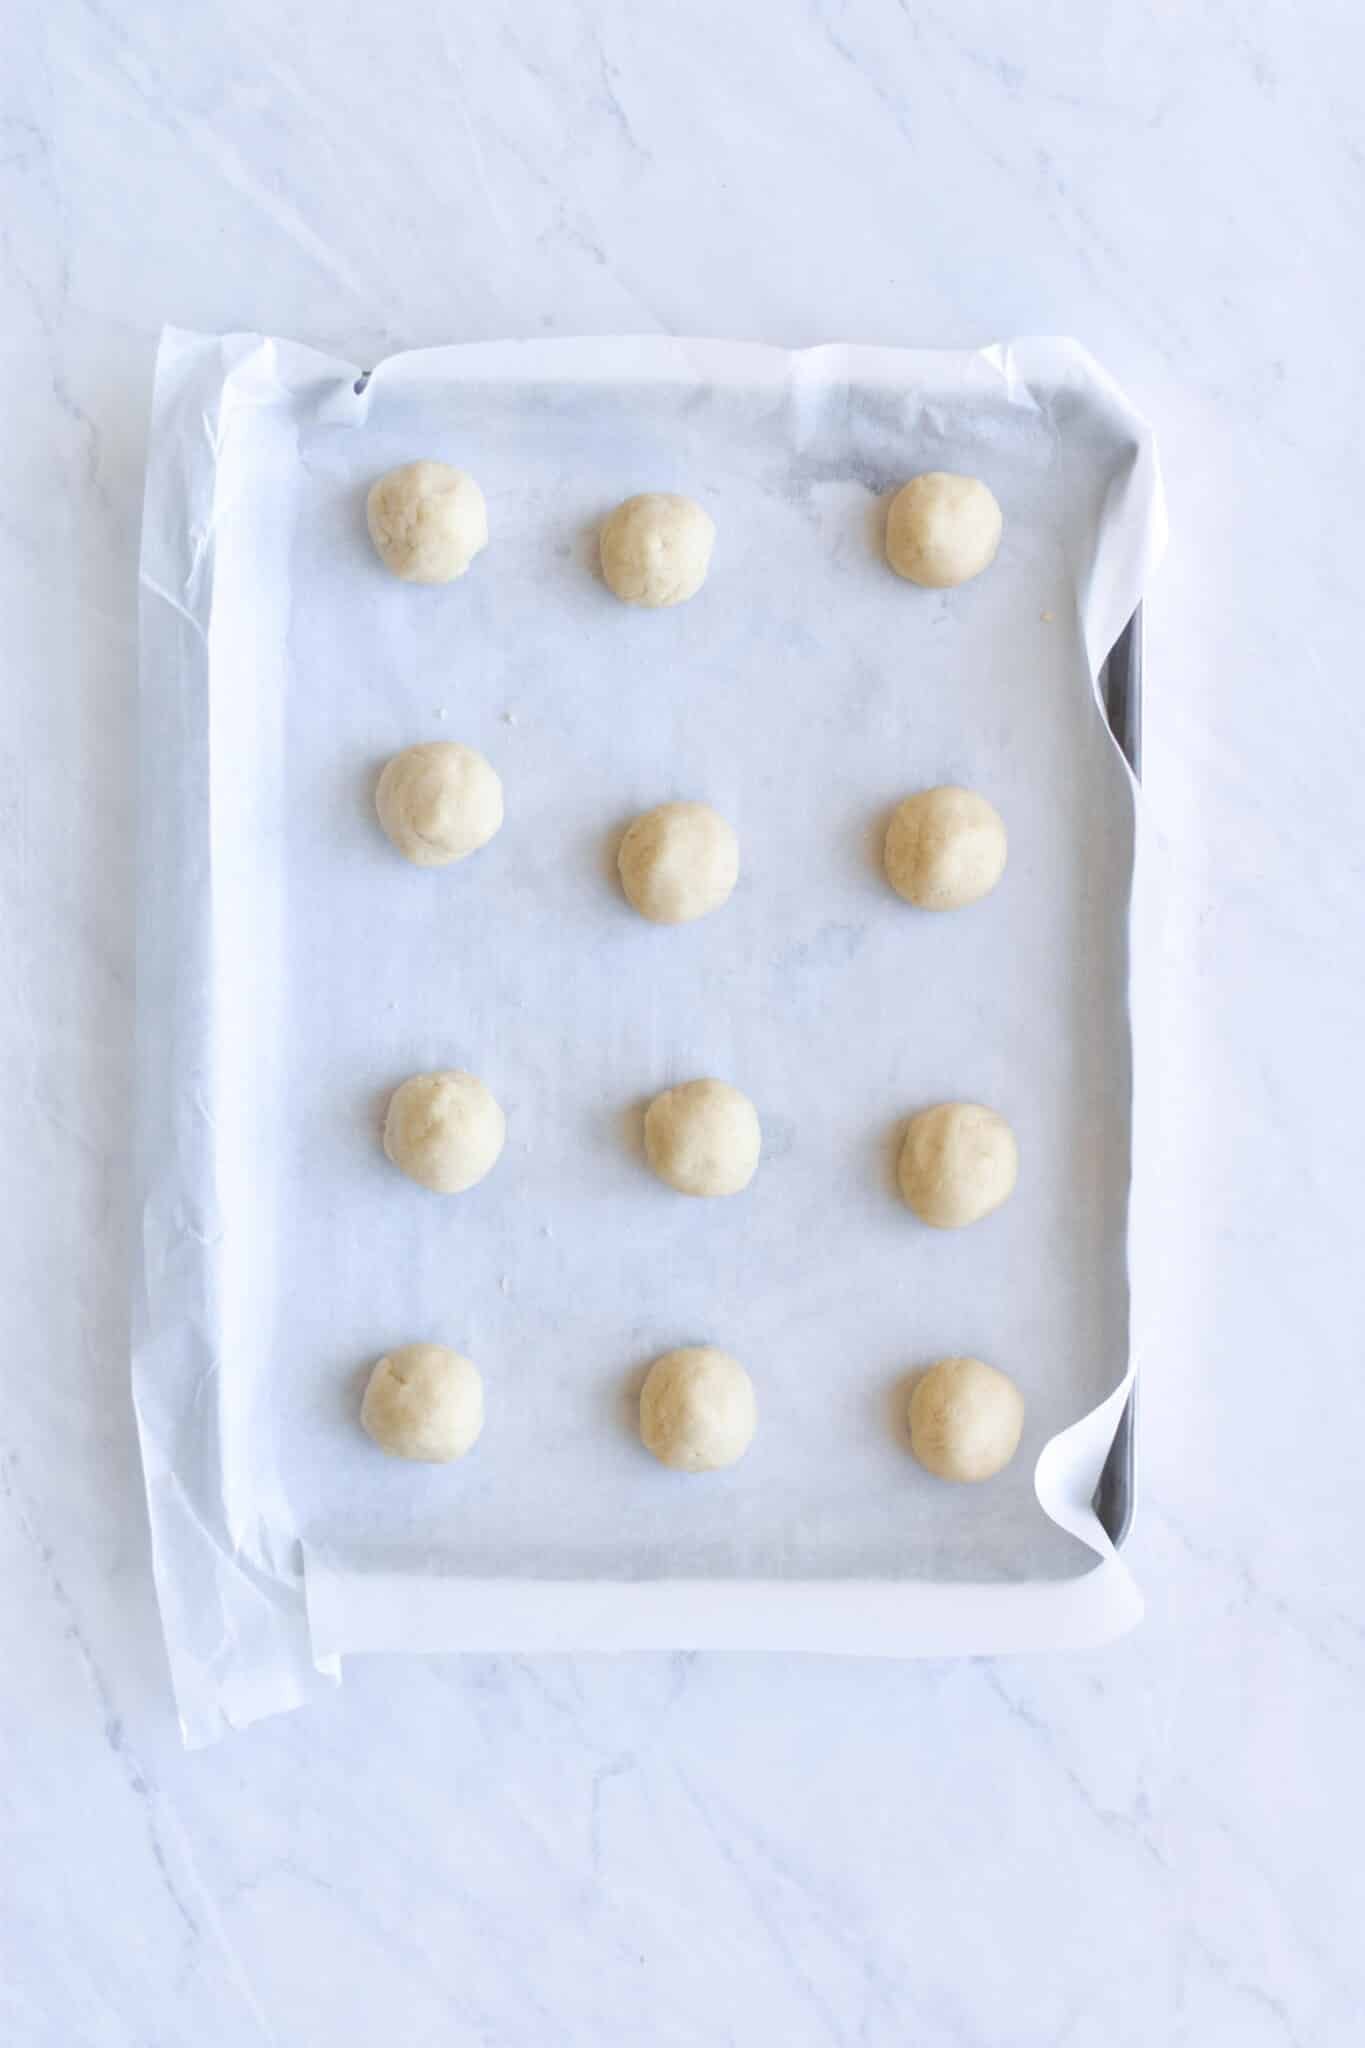 12 cookie dough balls on a parchment paper lined baking sheet on a marble surface